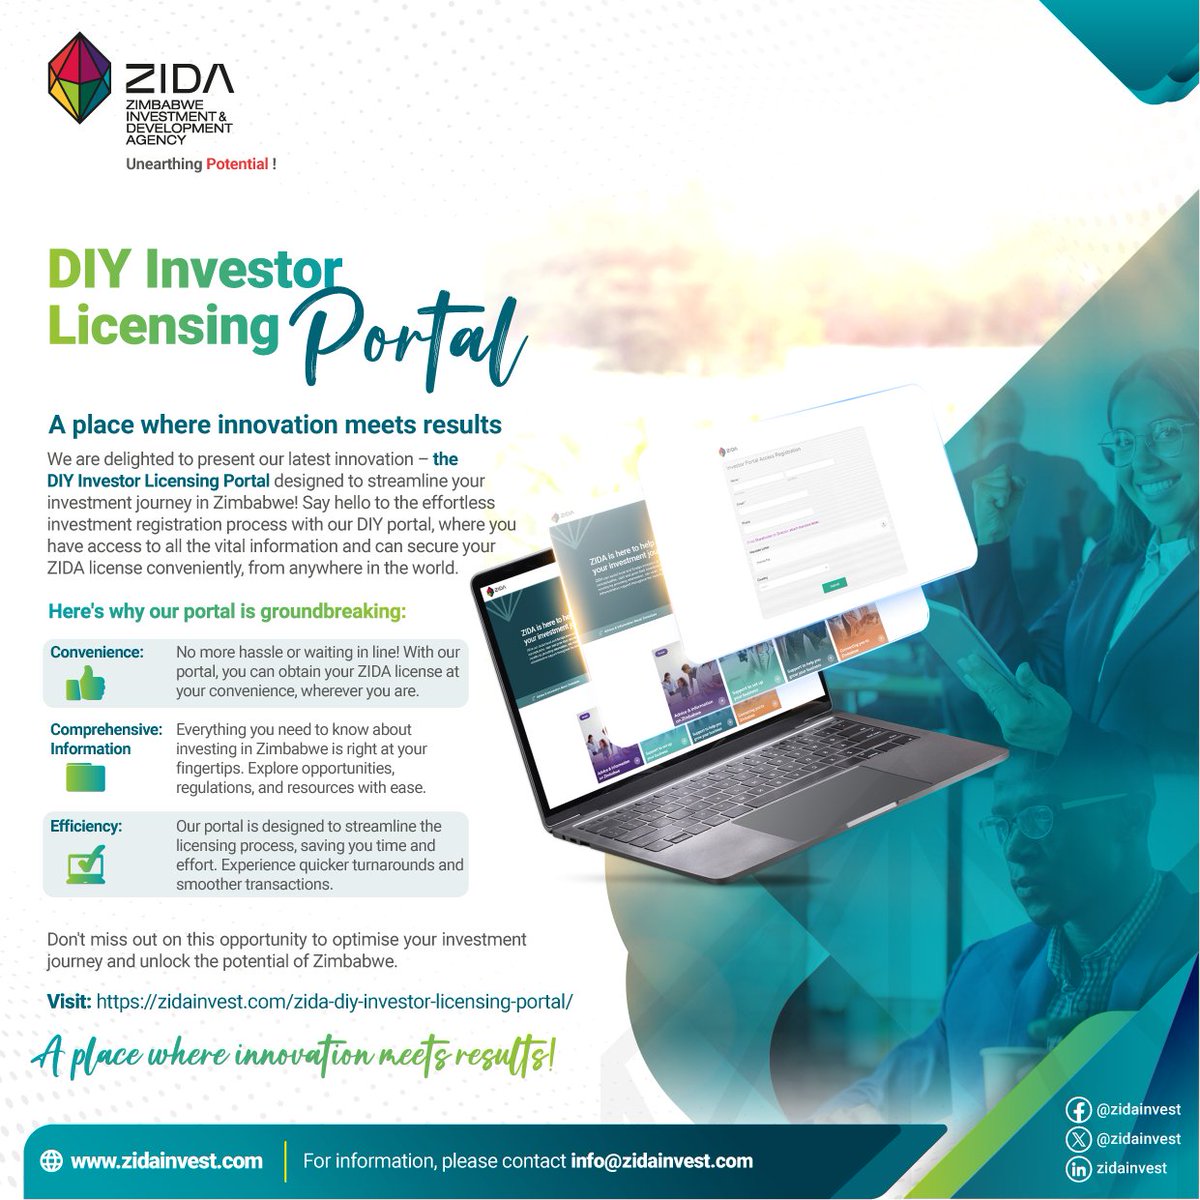 Say hello to the effortless investment registration process with our DIY portal, where you have access to all the vital information and can secure your ZIDA license conveniently from anywhere in the world. Visit zurl.co/skJA A place where innovation meets results.